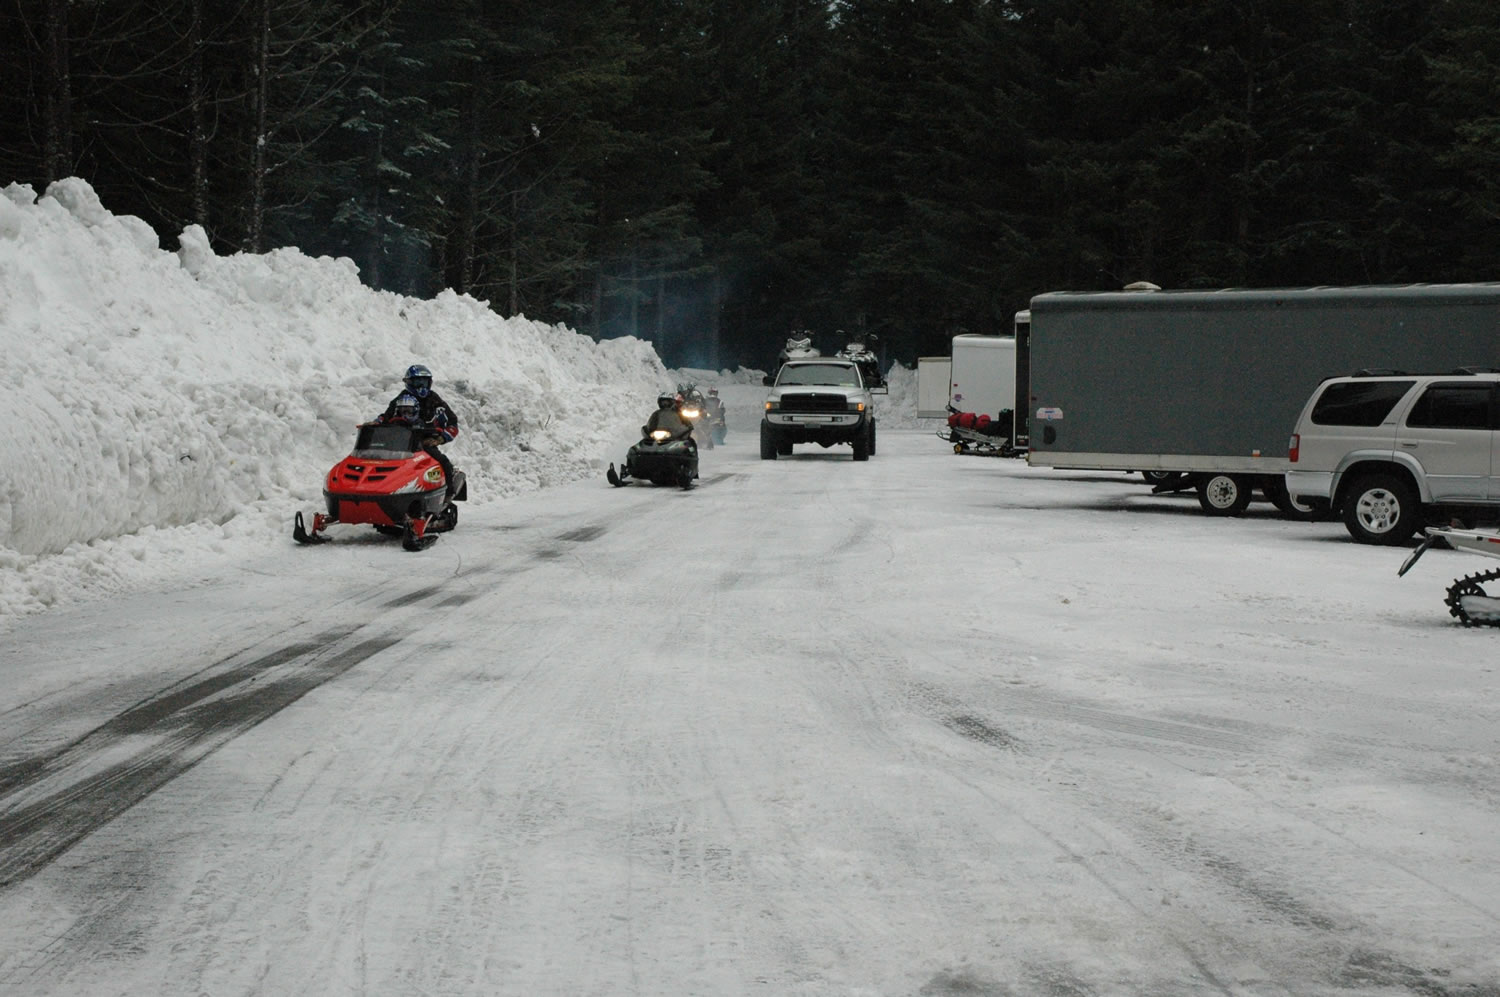 Marble Mountain Sno-Park on the south side of Mount St. Helens got plenty of weekend use by snowmobile riders, snowshoers, cross-country skiers and sledders.